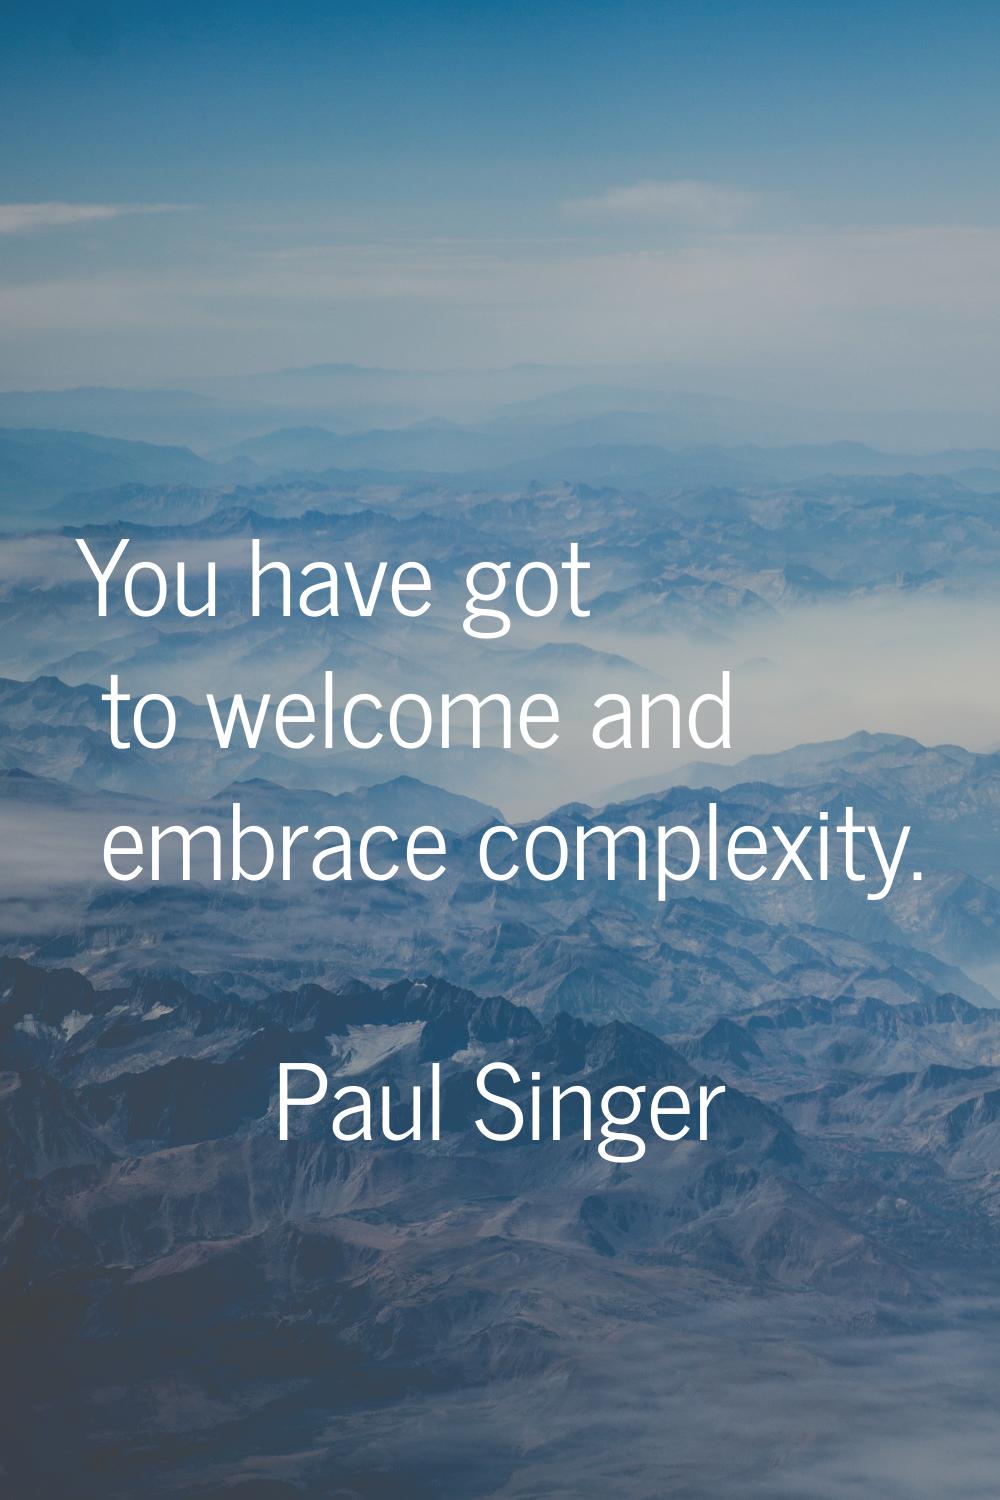 You have got to welcome and embrace complexity.